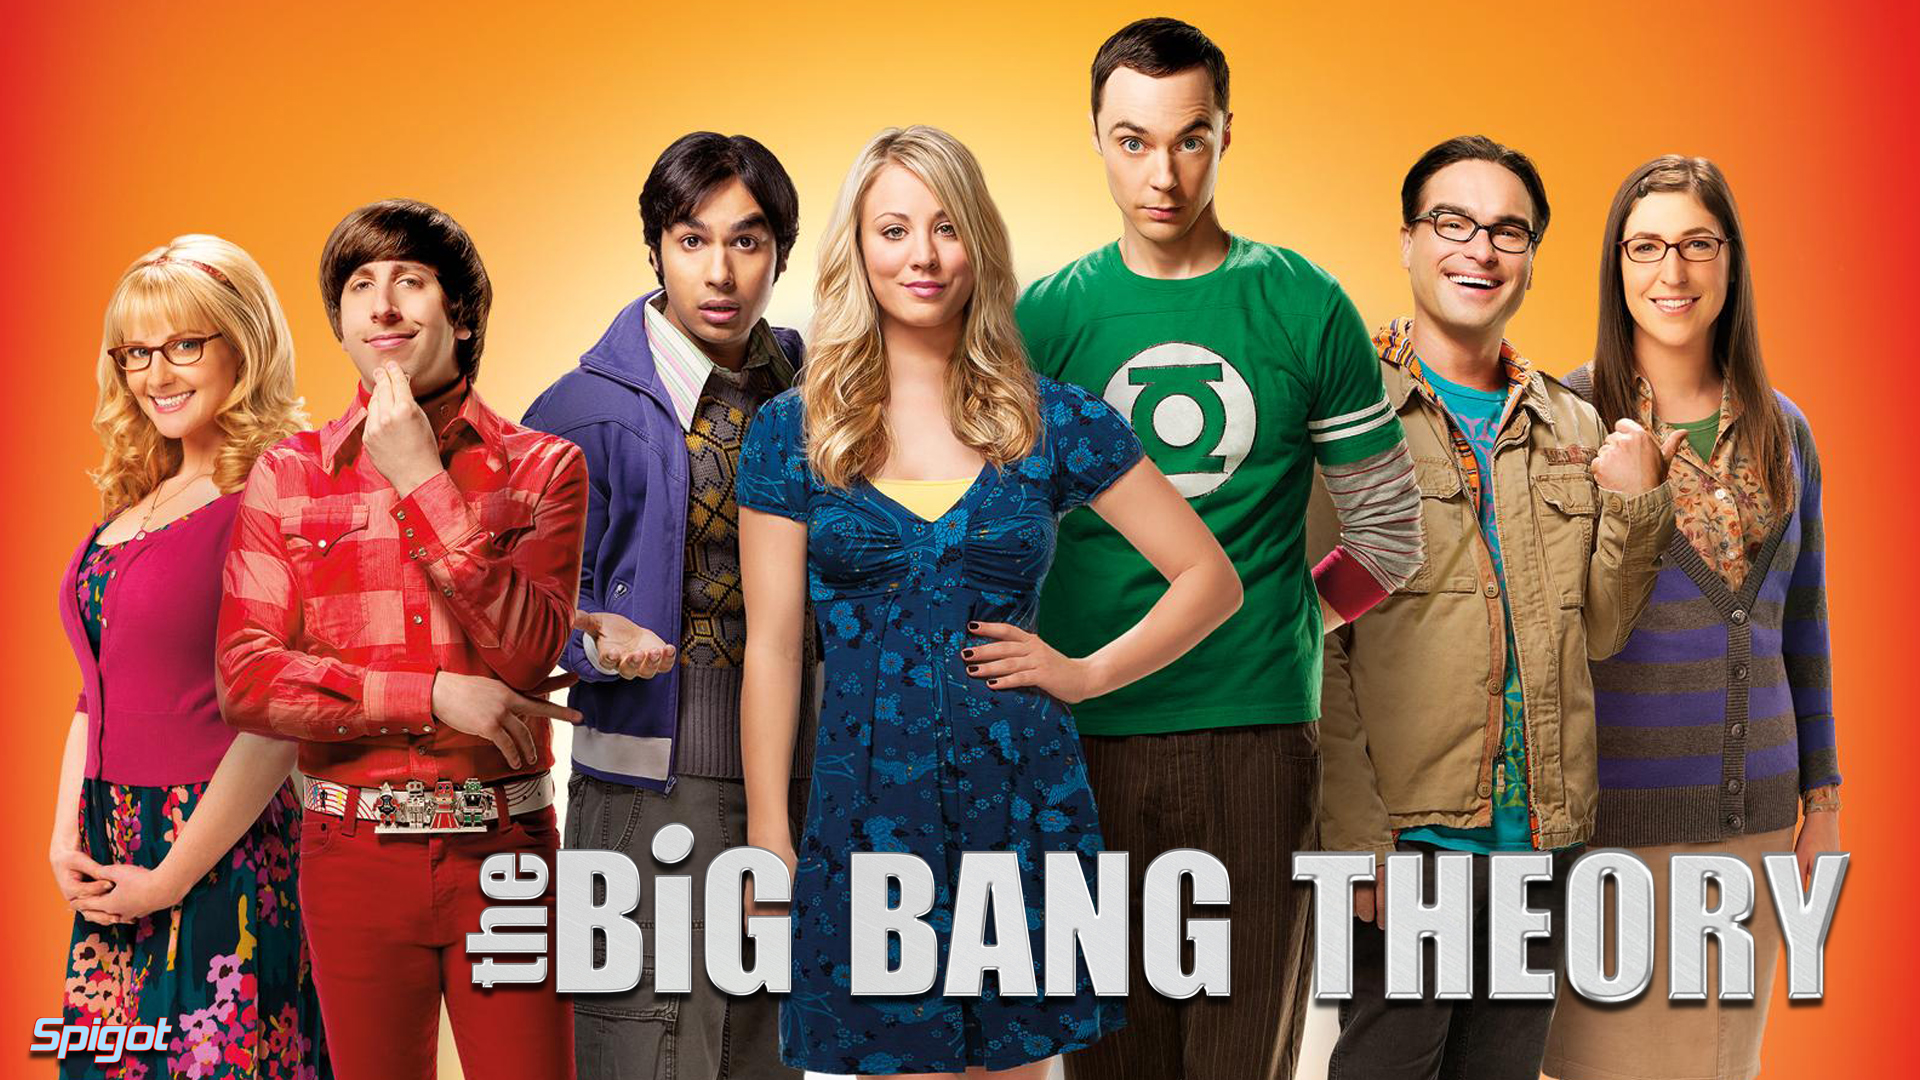 The Big Bang Theory Cast Settee POSTER 